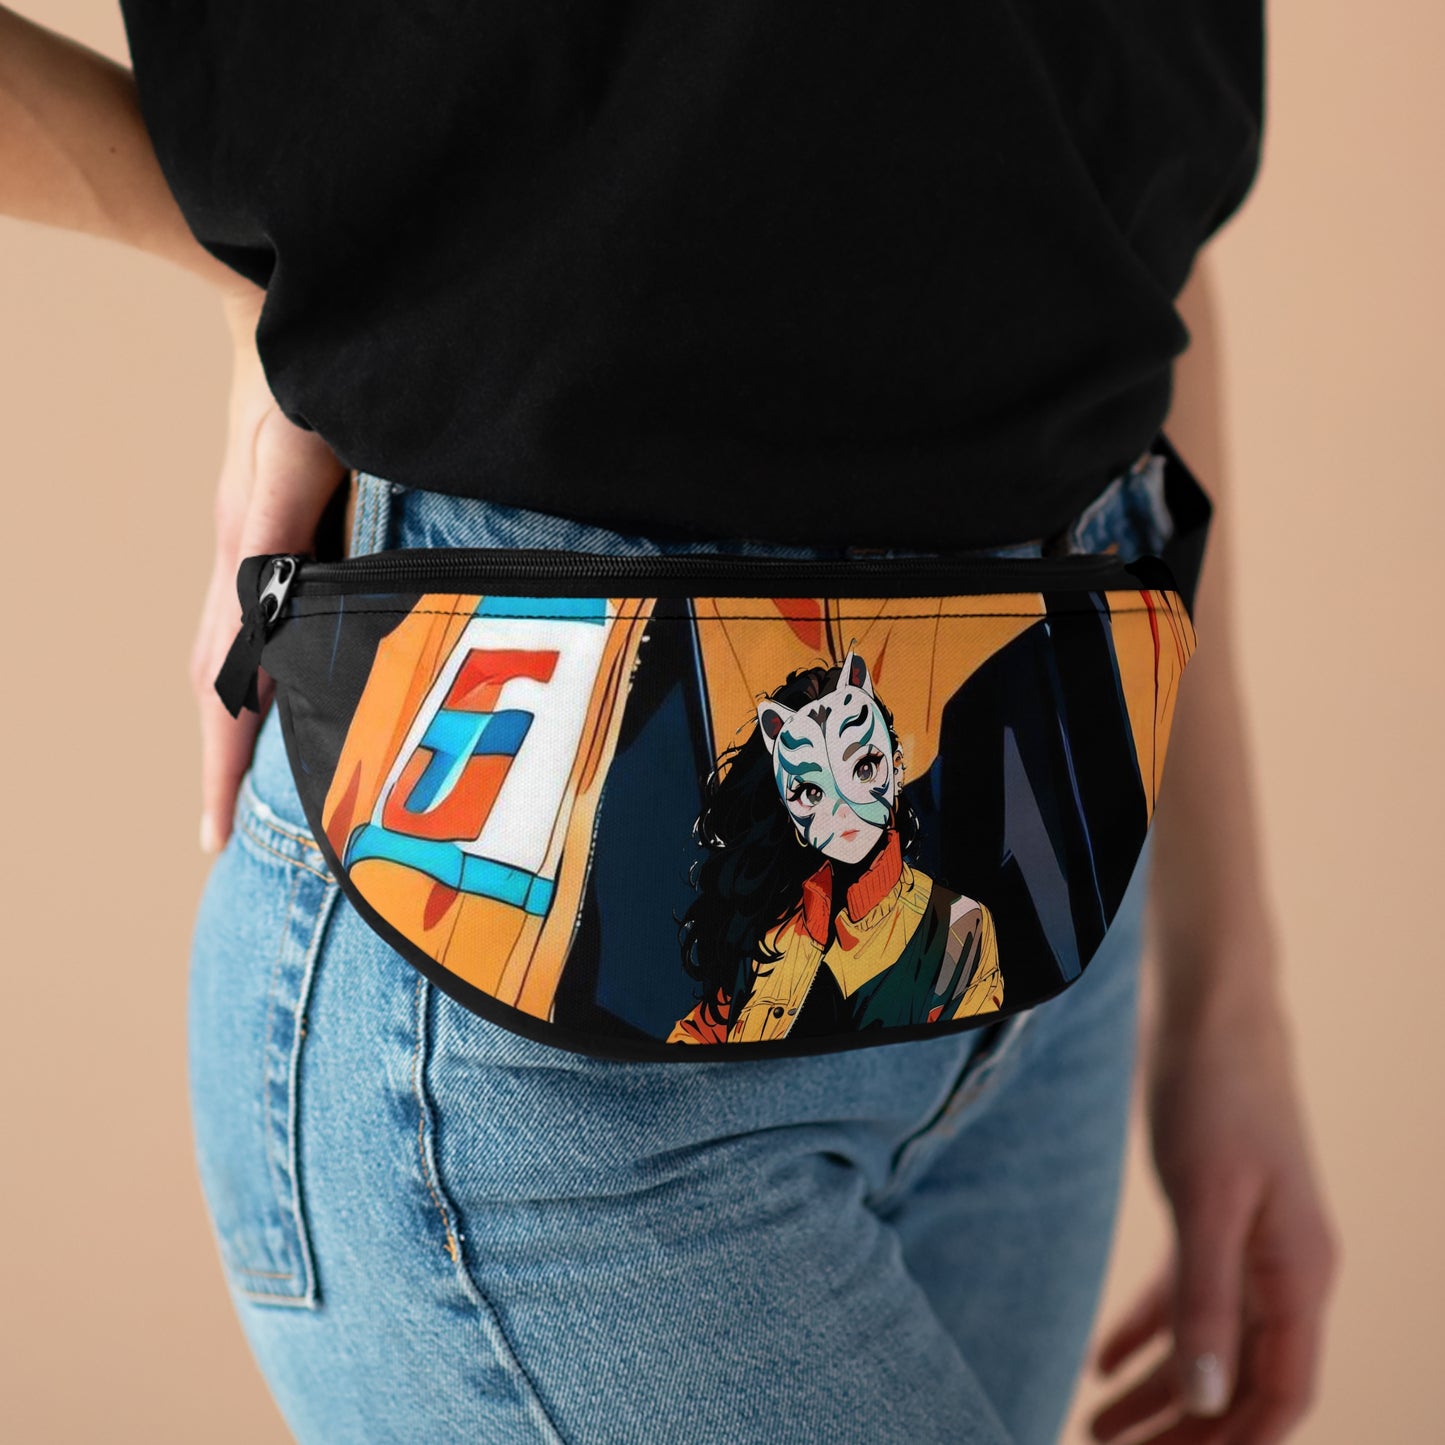 Anime Style Art Fanny Pack- "Kat on the Attack"